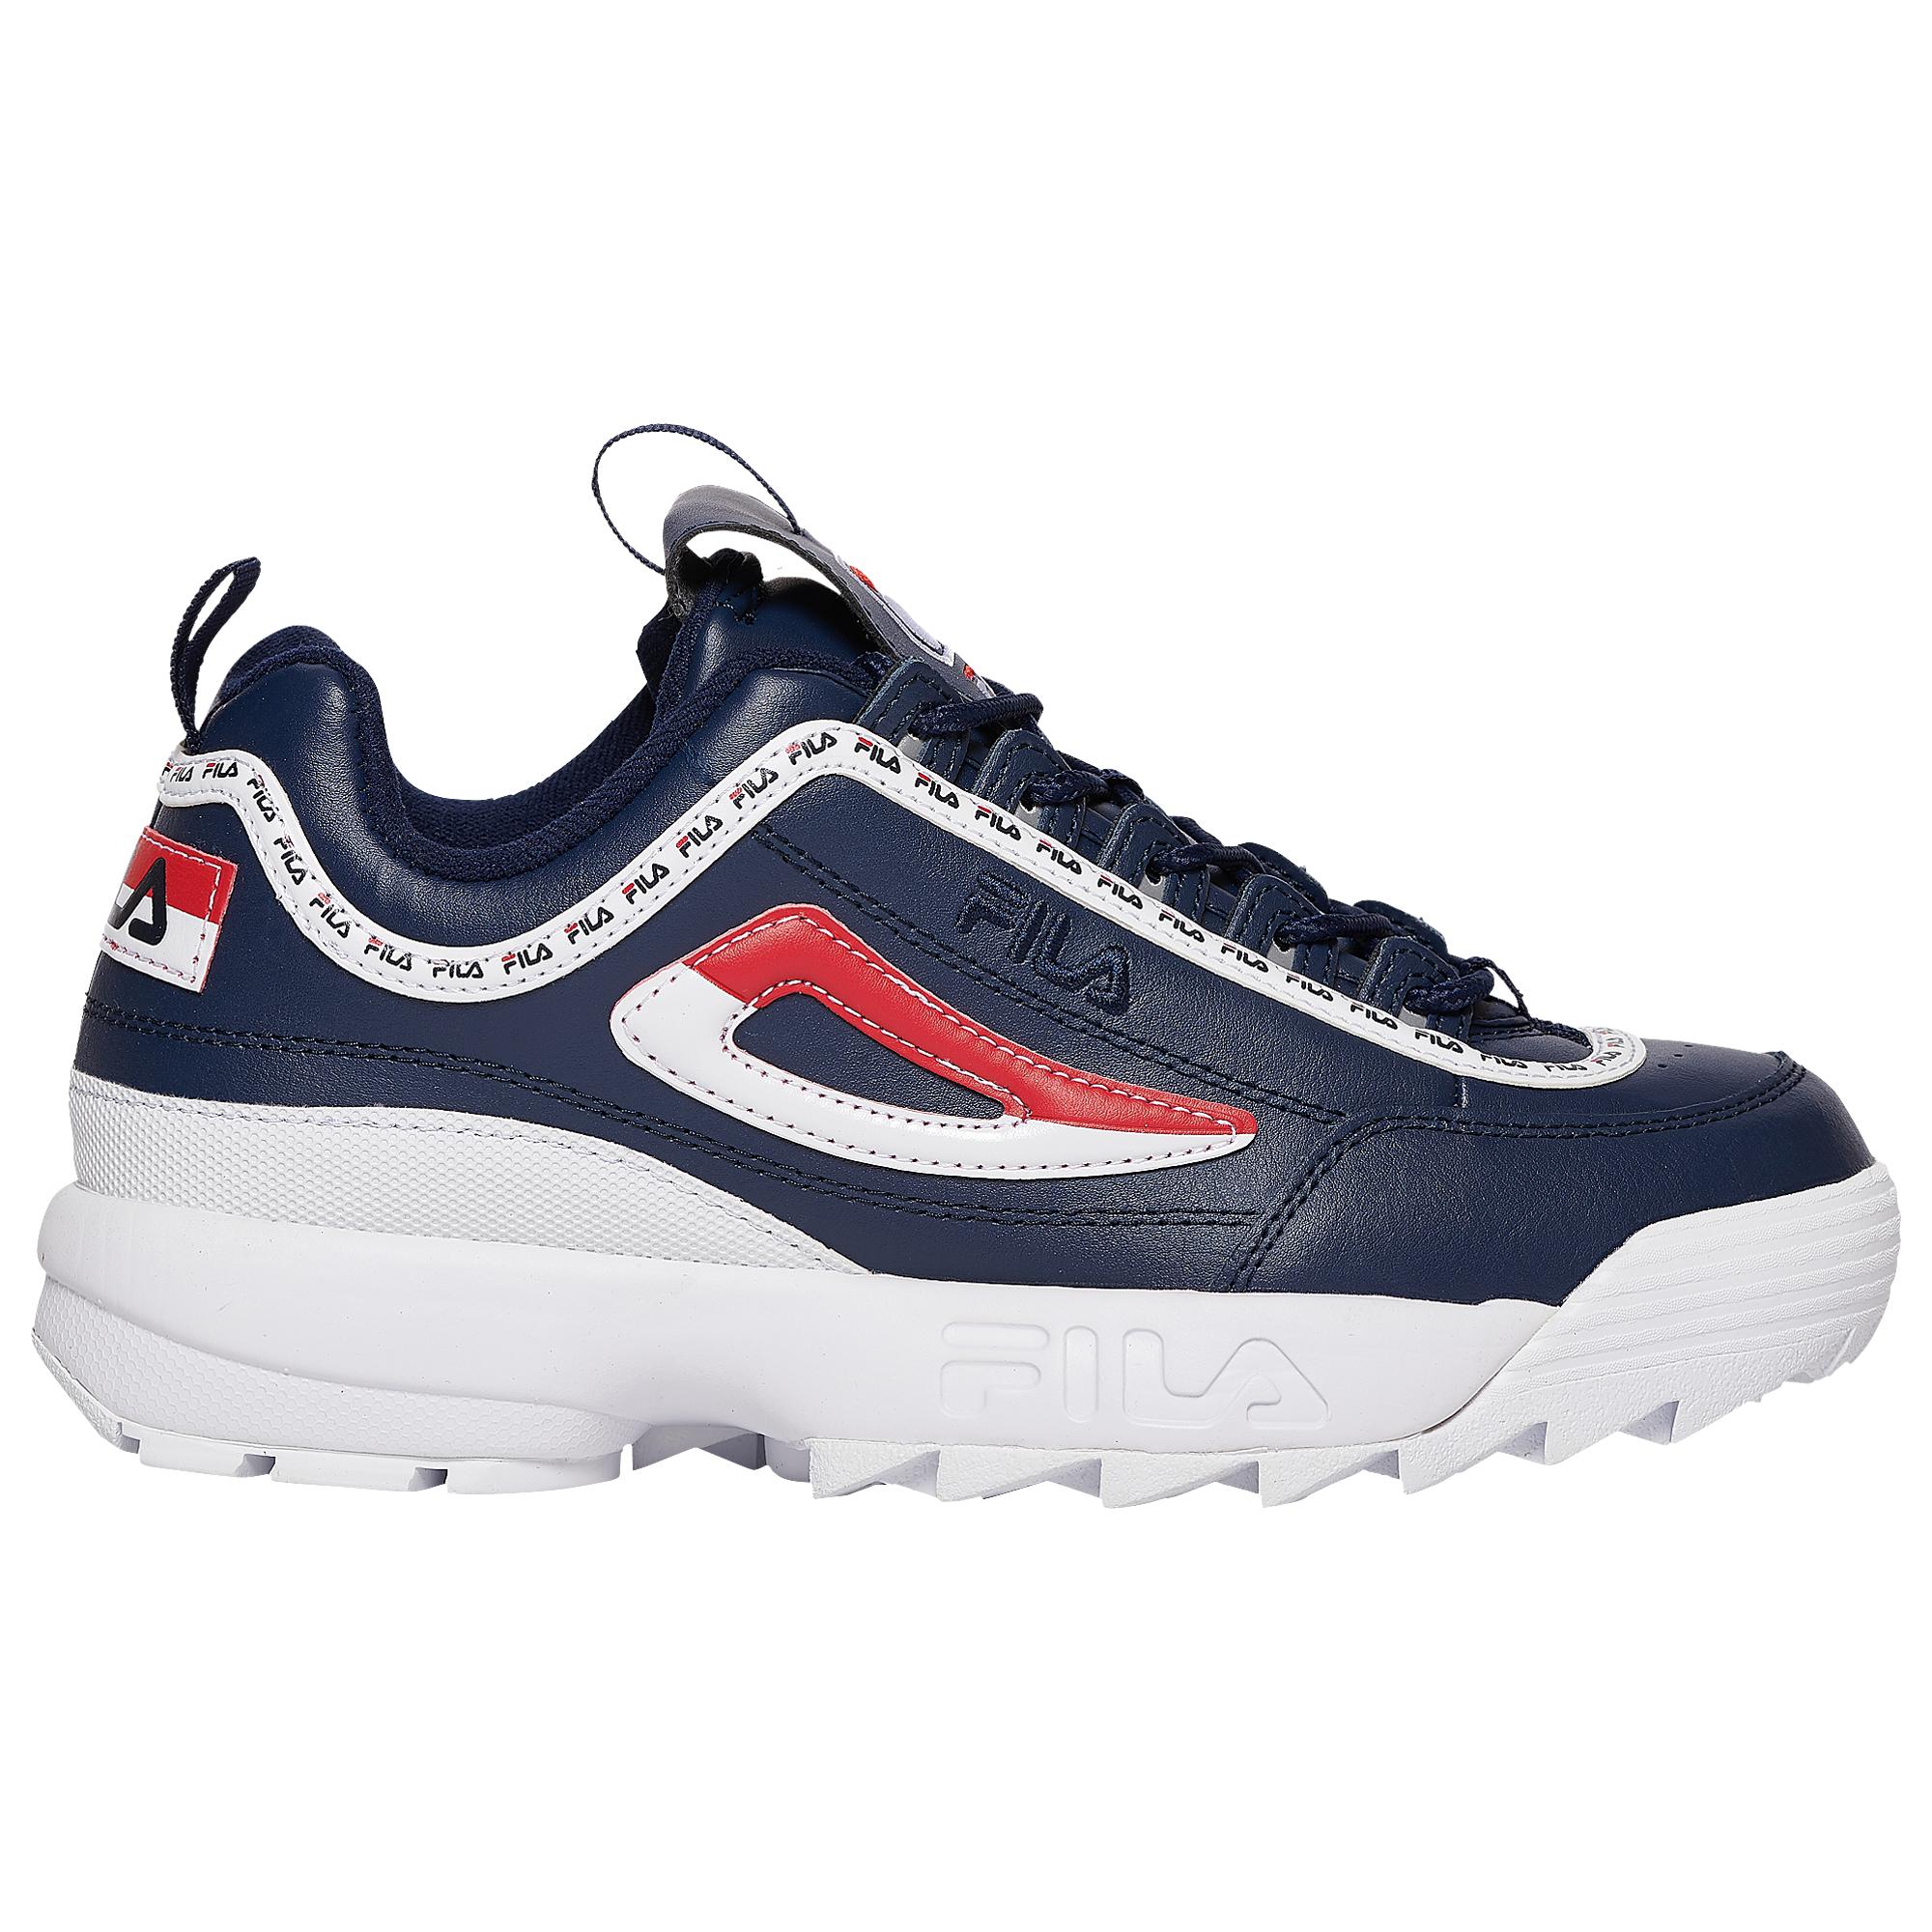 fila white and blue shoes